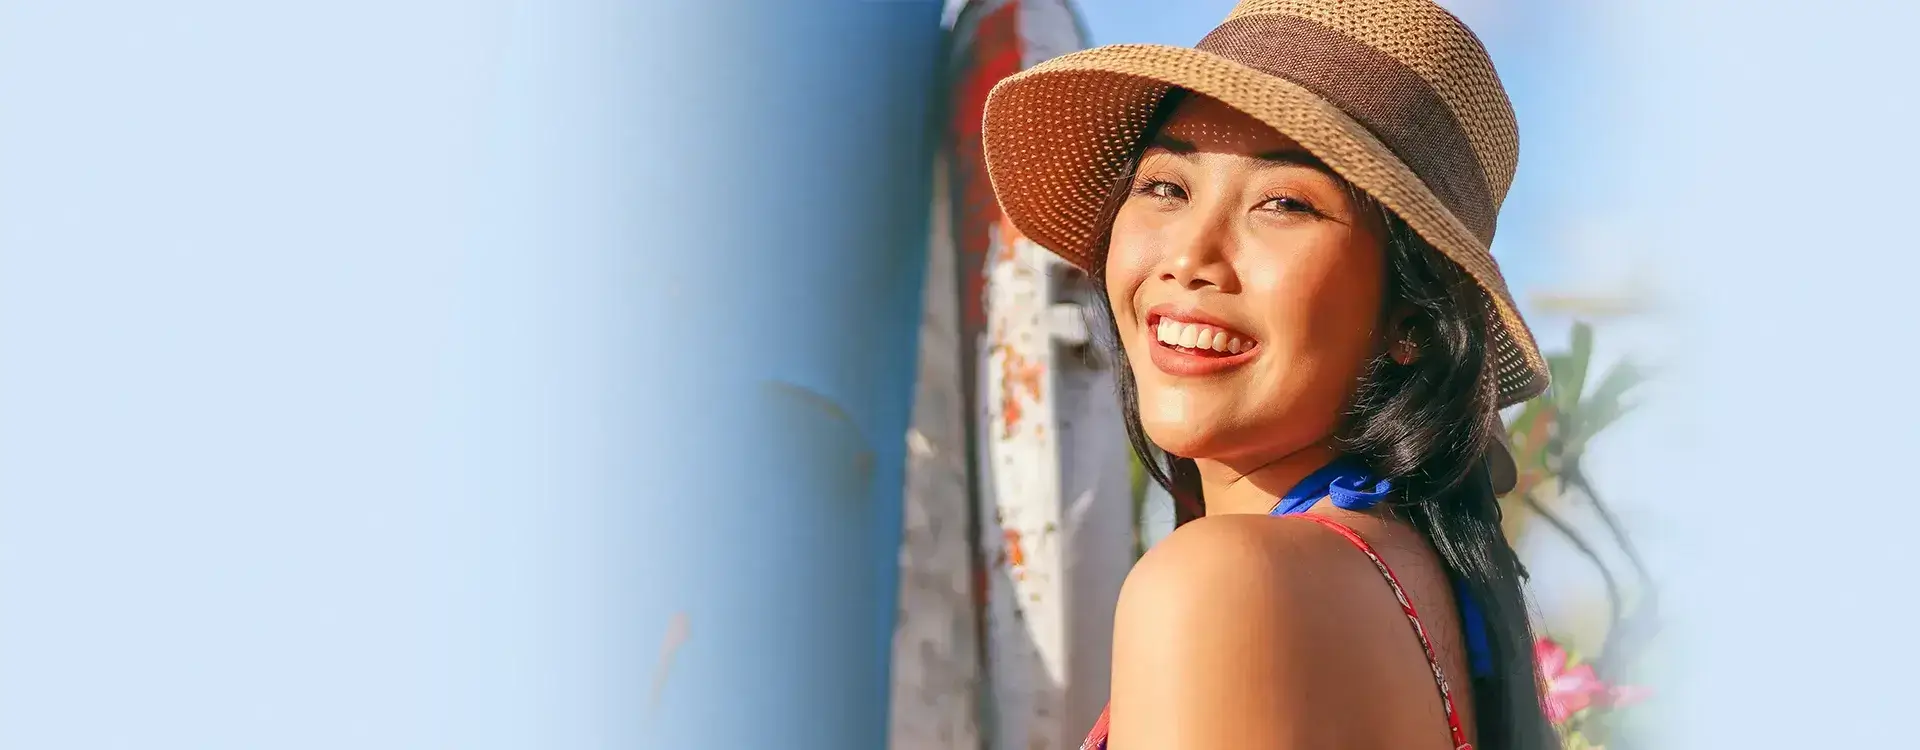 Asian woman smiling in a sun hat with a clear blue sky in the background.